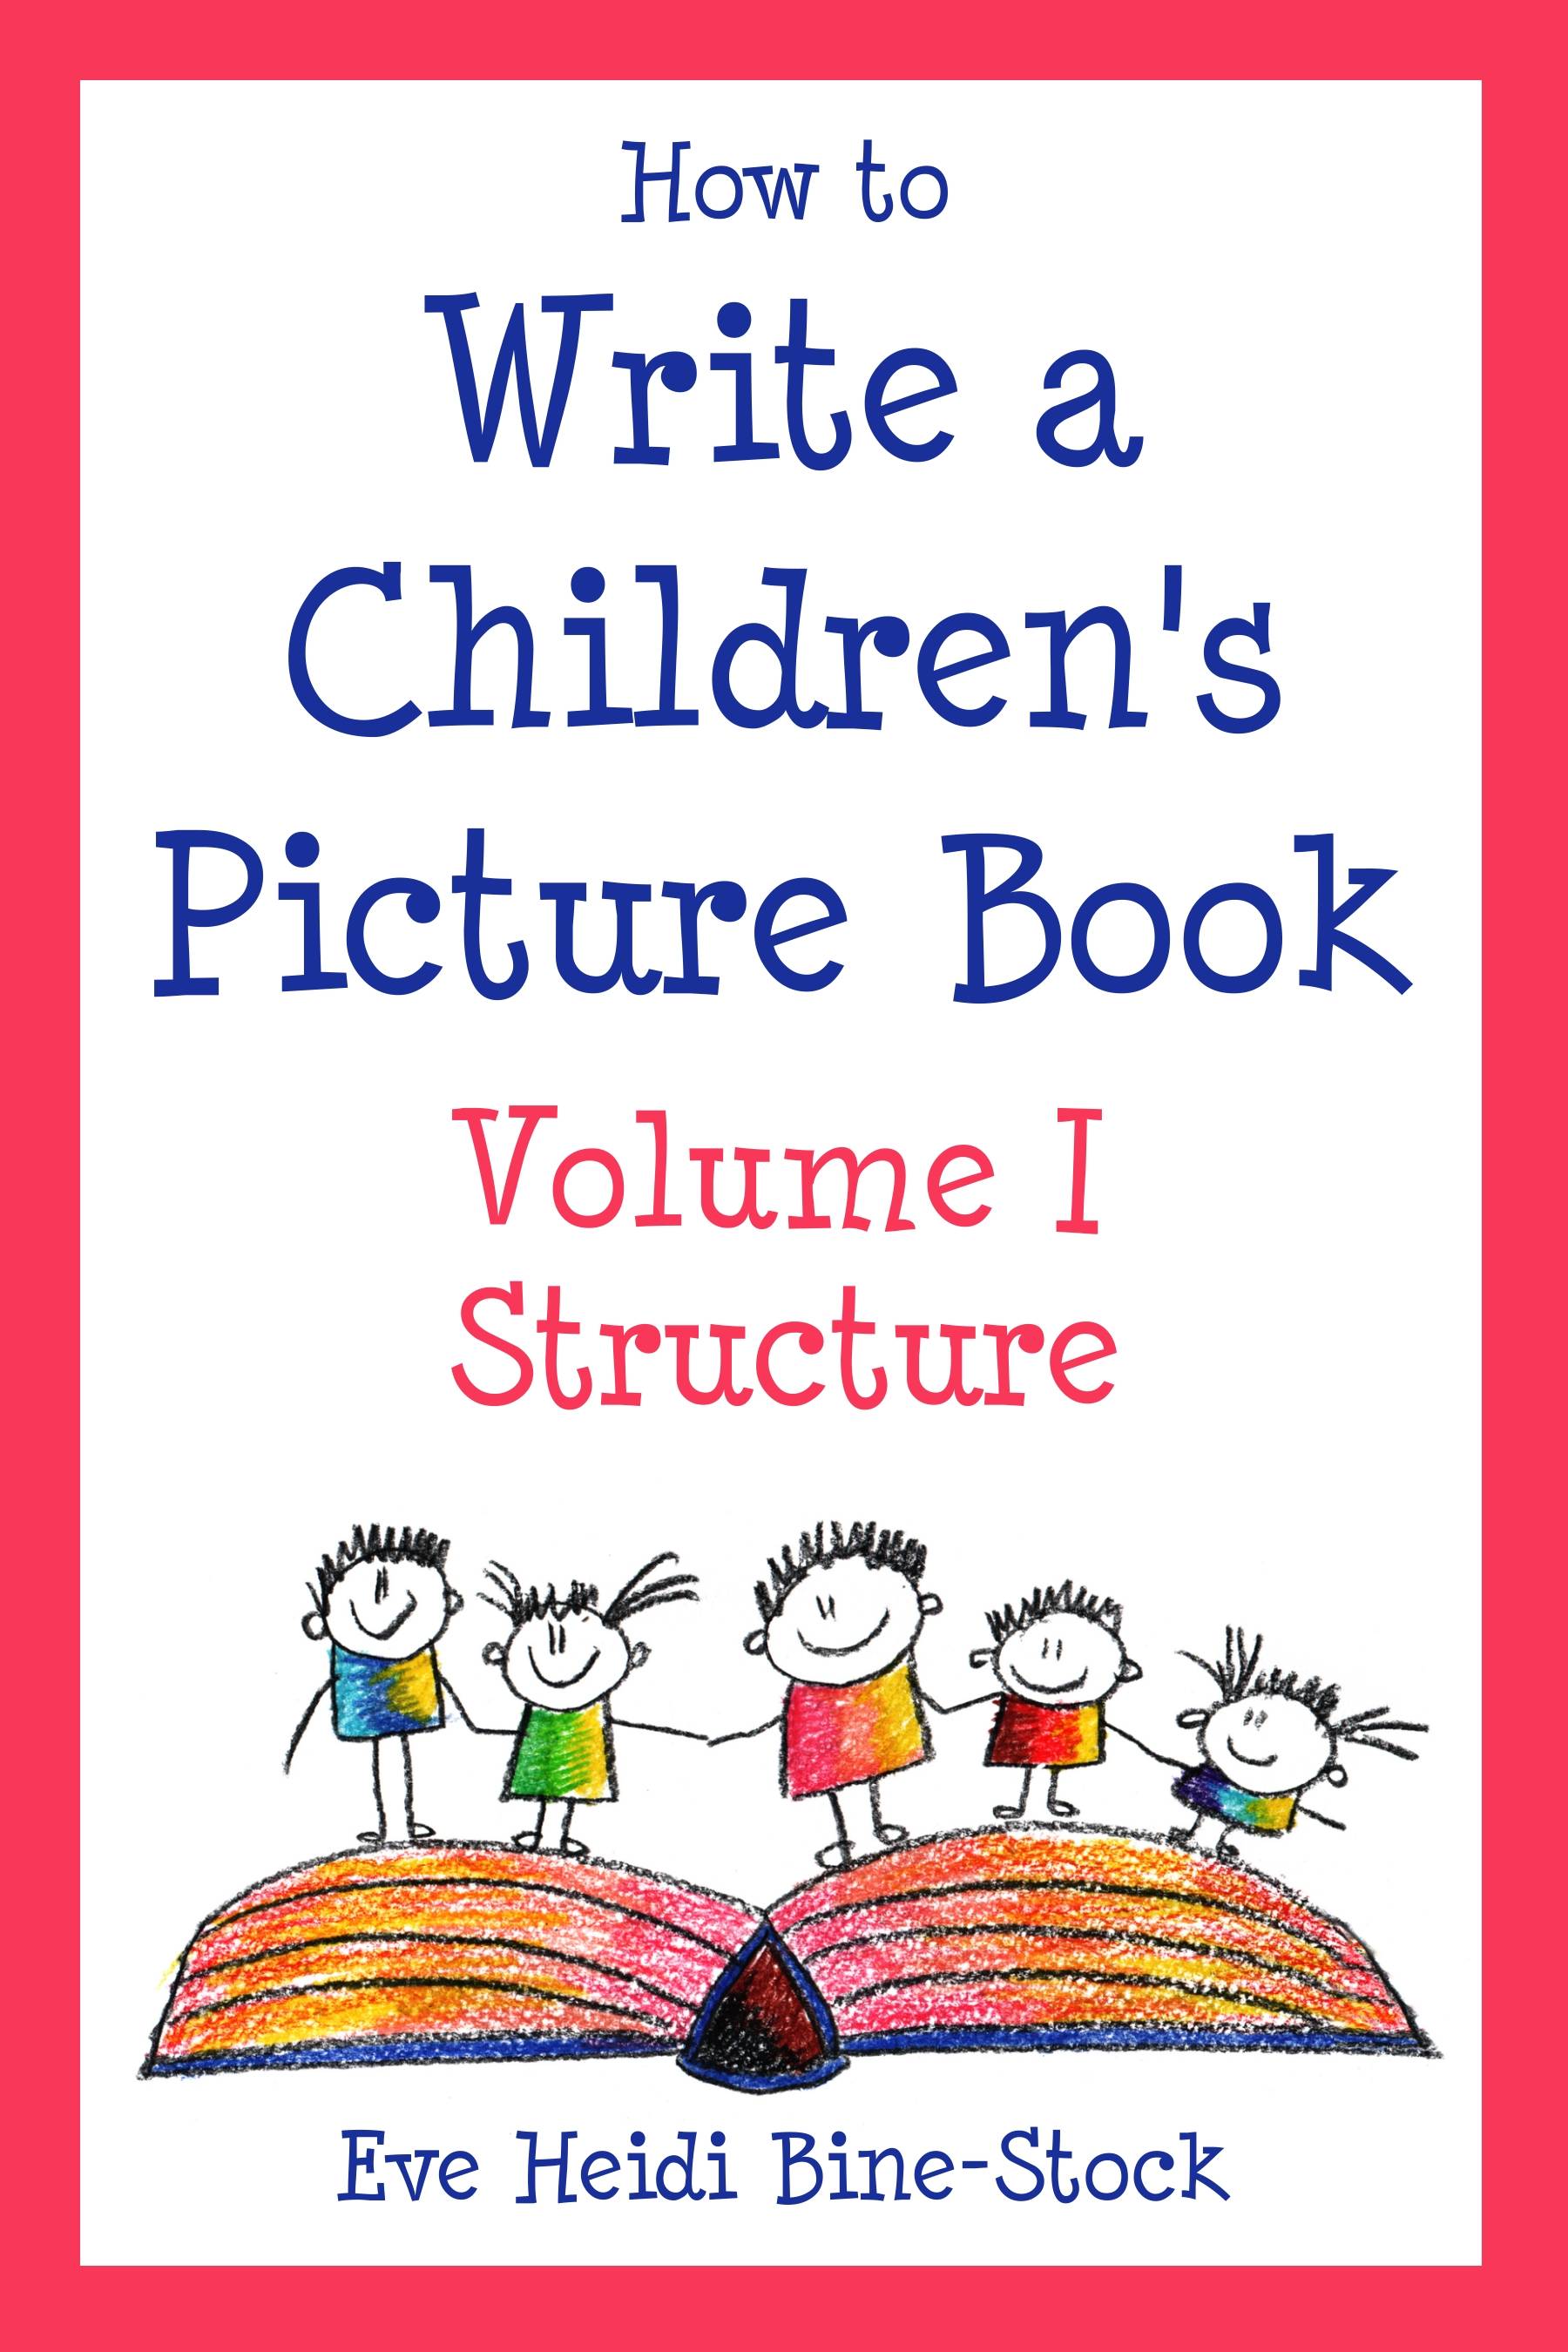 How to Write a Children's Picture Book: Vol. I: Structure's featured image